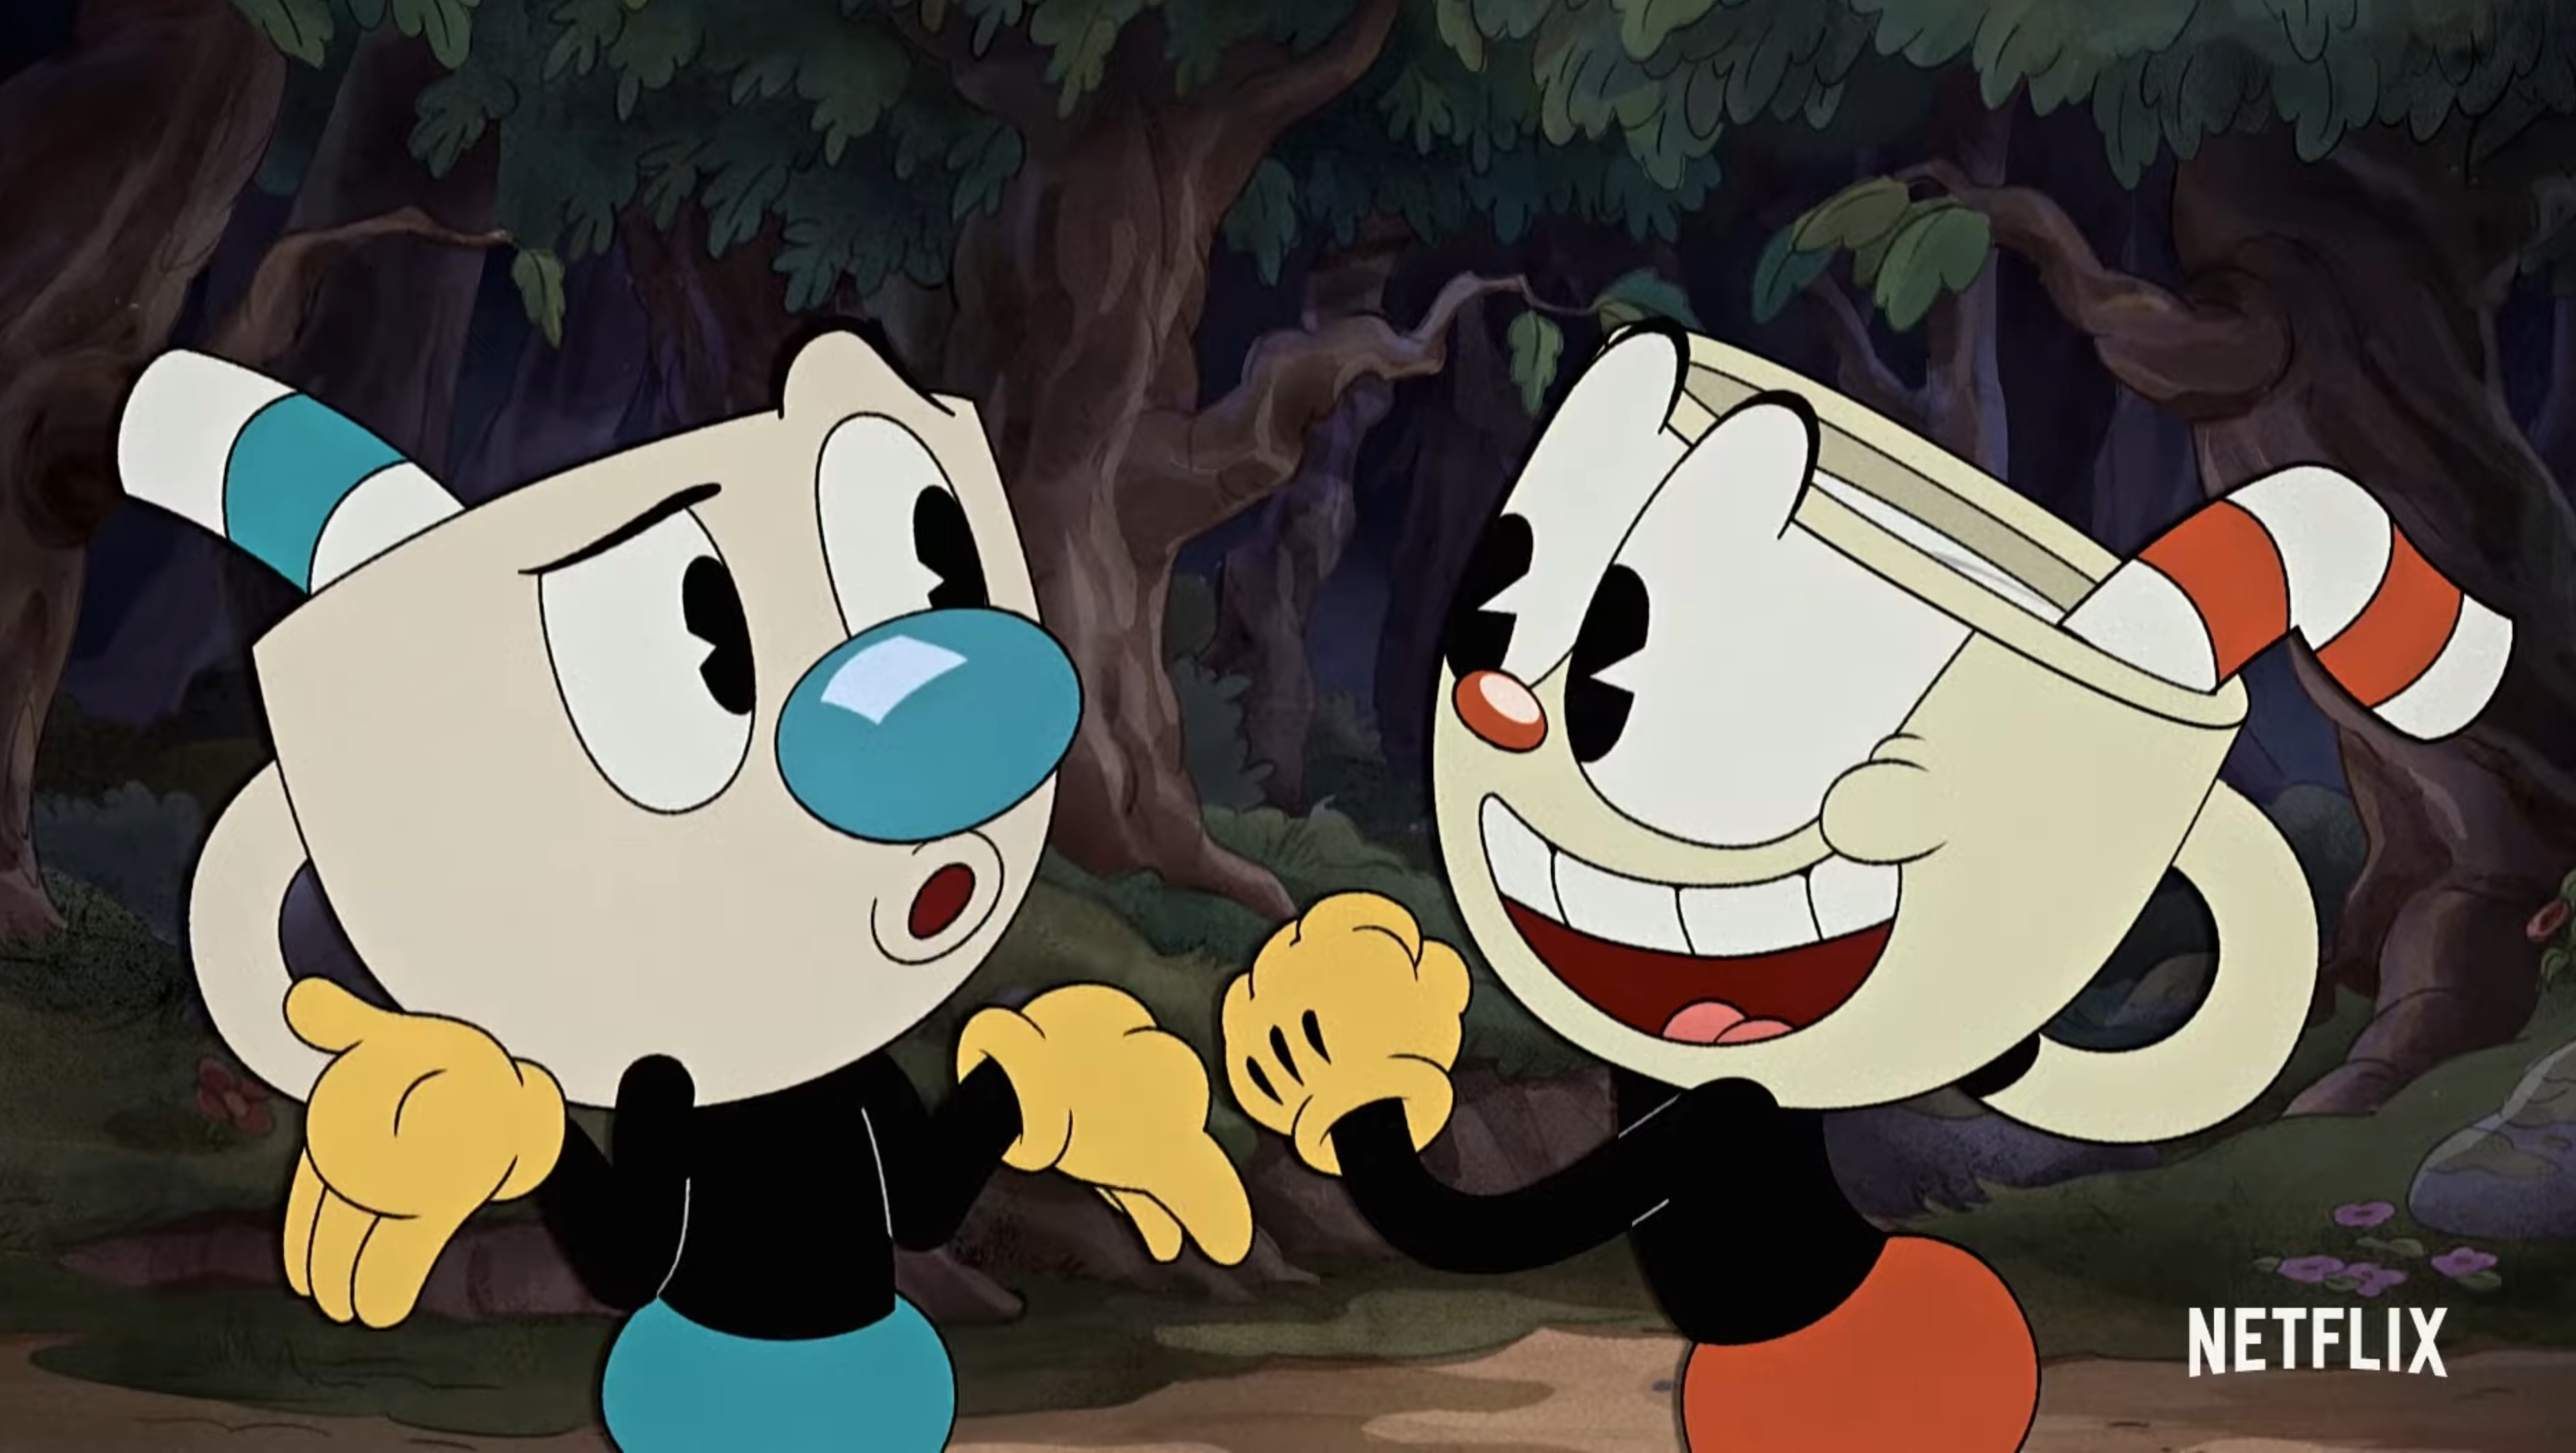  The Cuphead Show gets a rowdy new trailer ahead of February premiere on Netflix 